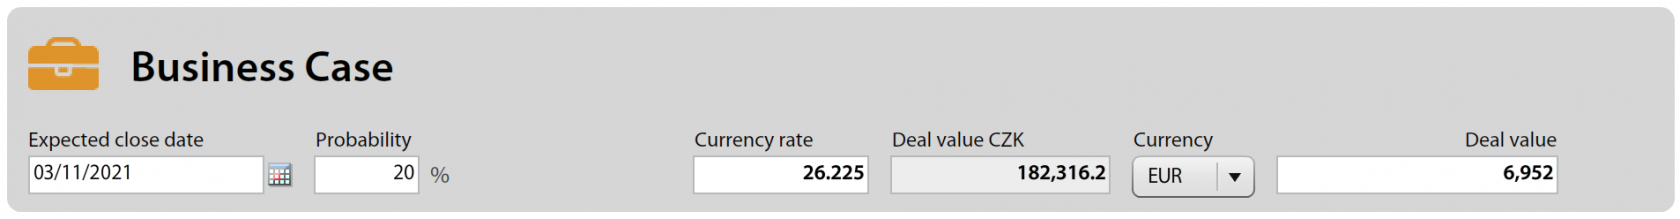 deal-detail-exchange-rate.png